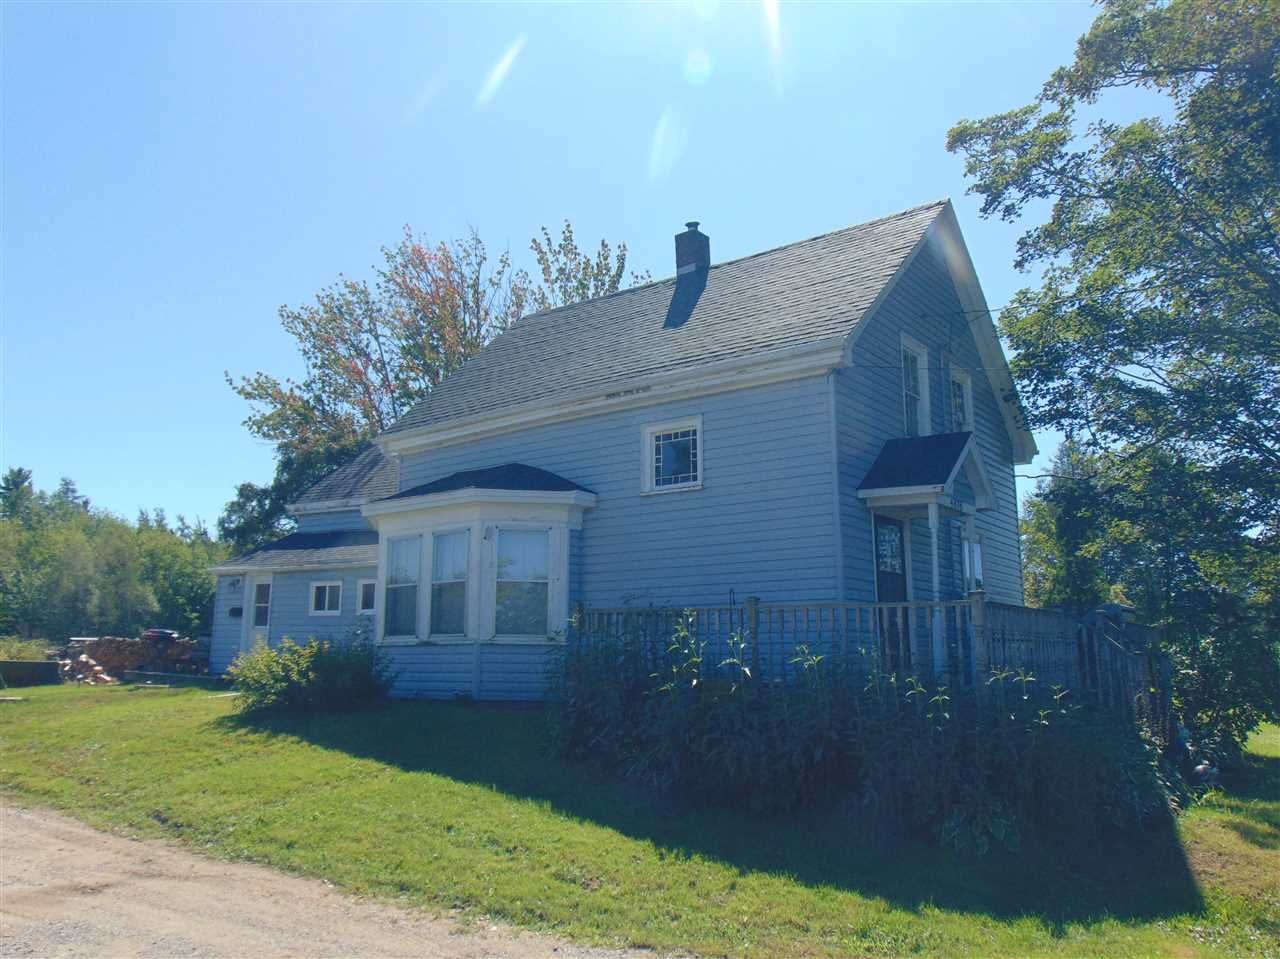 Main Photo: 4876 BROOKLYN Street in Somerset: 404-Kings County Farm for sale (Annapolis Valley)  : MLS®# 201921542